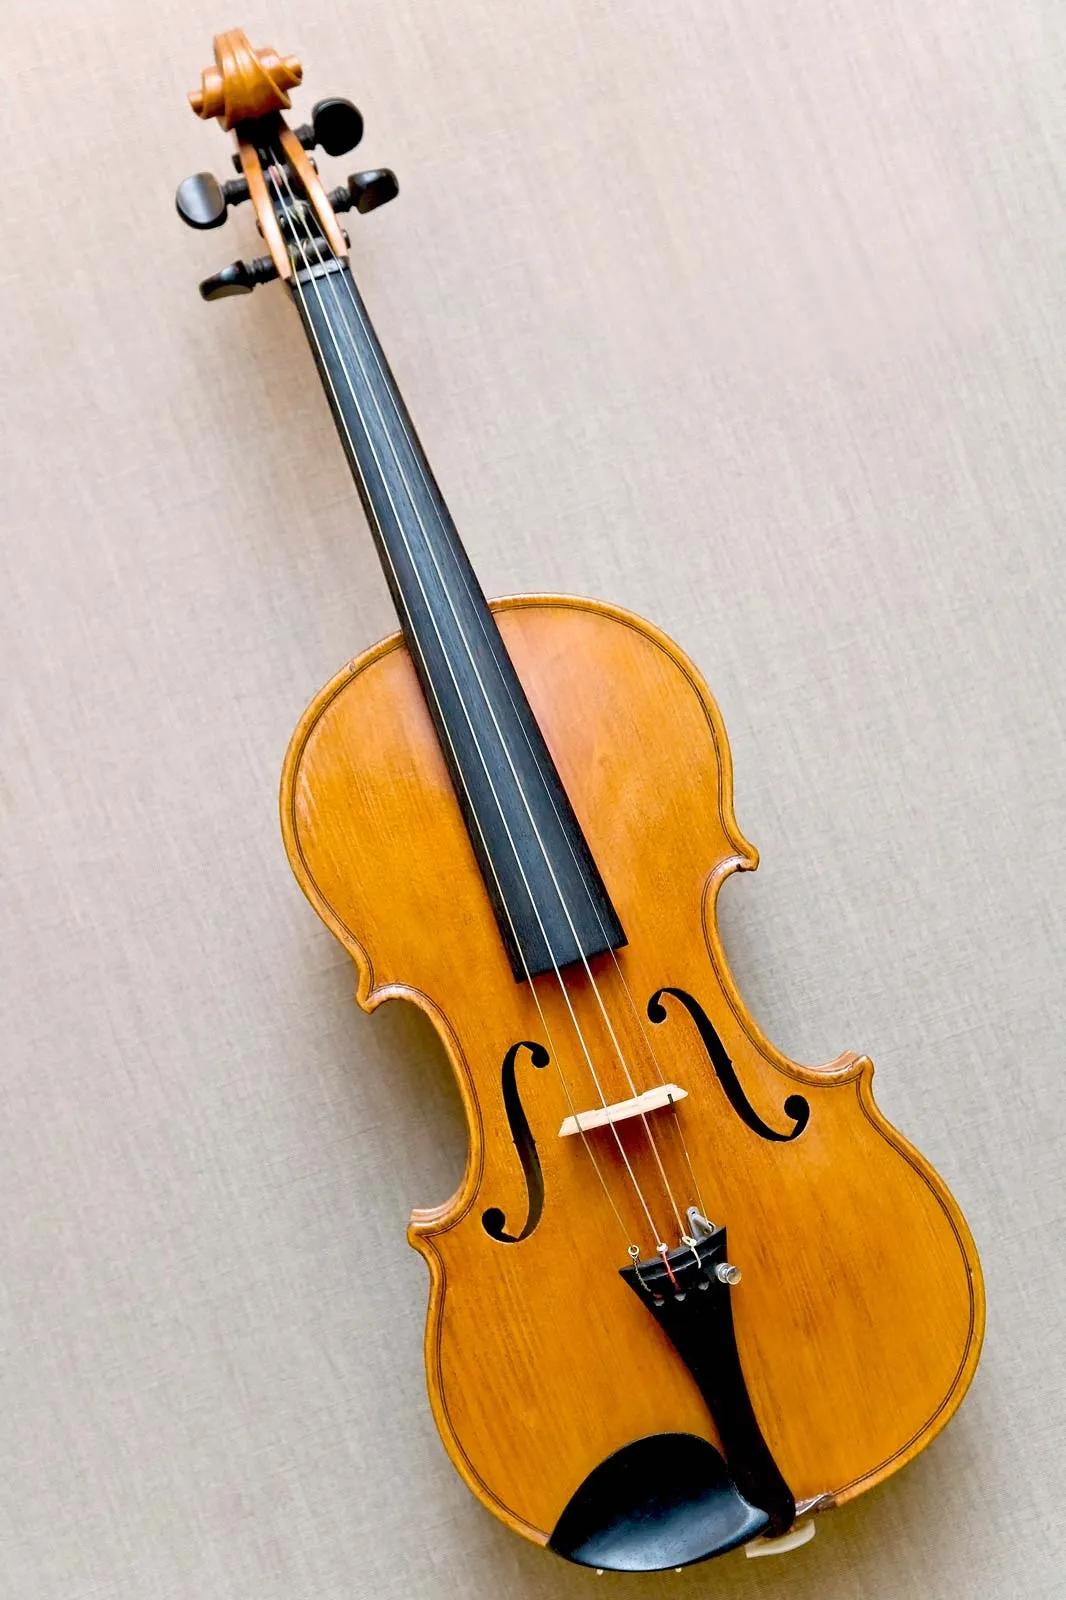 a violin is an example of a string instrument - What is an example of string instrument